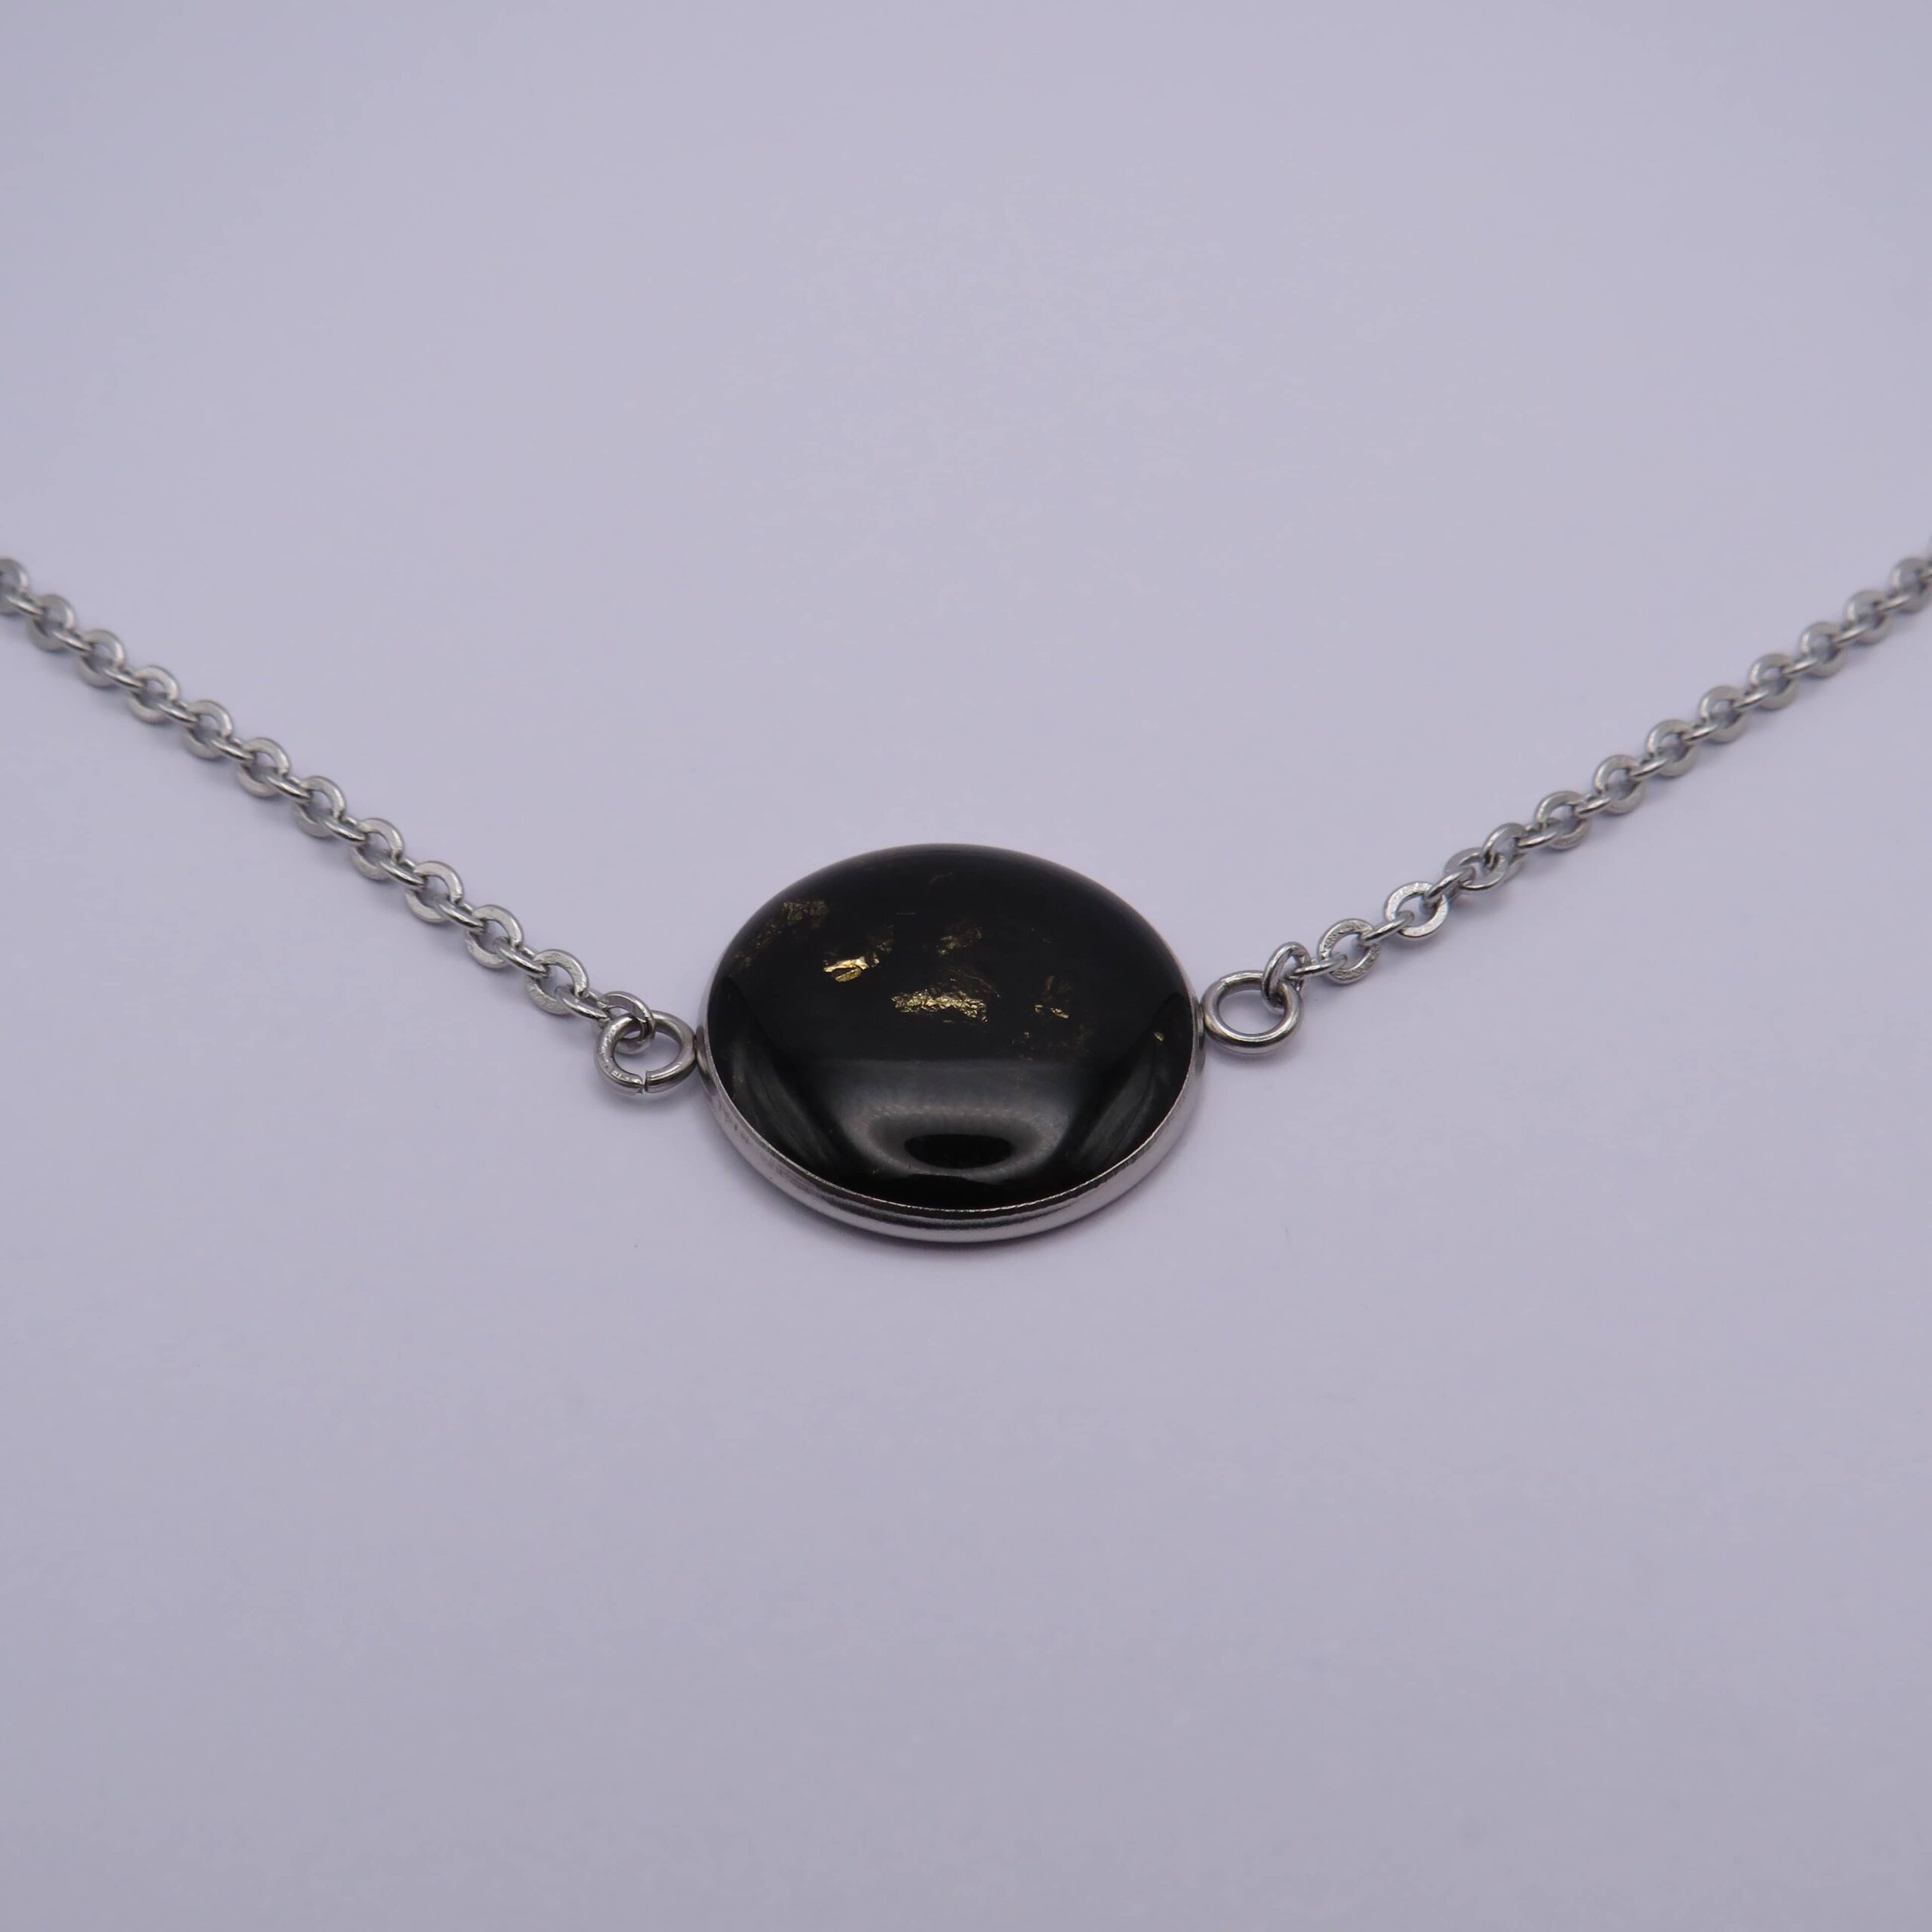 Stainless Steel Black Cabochon & Gold Leaf Necklace